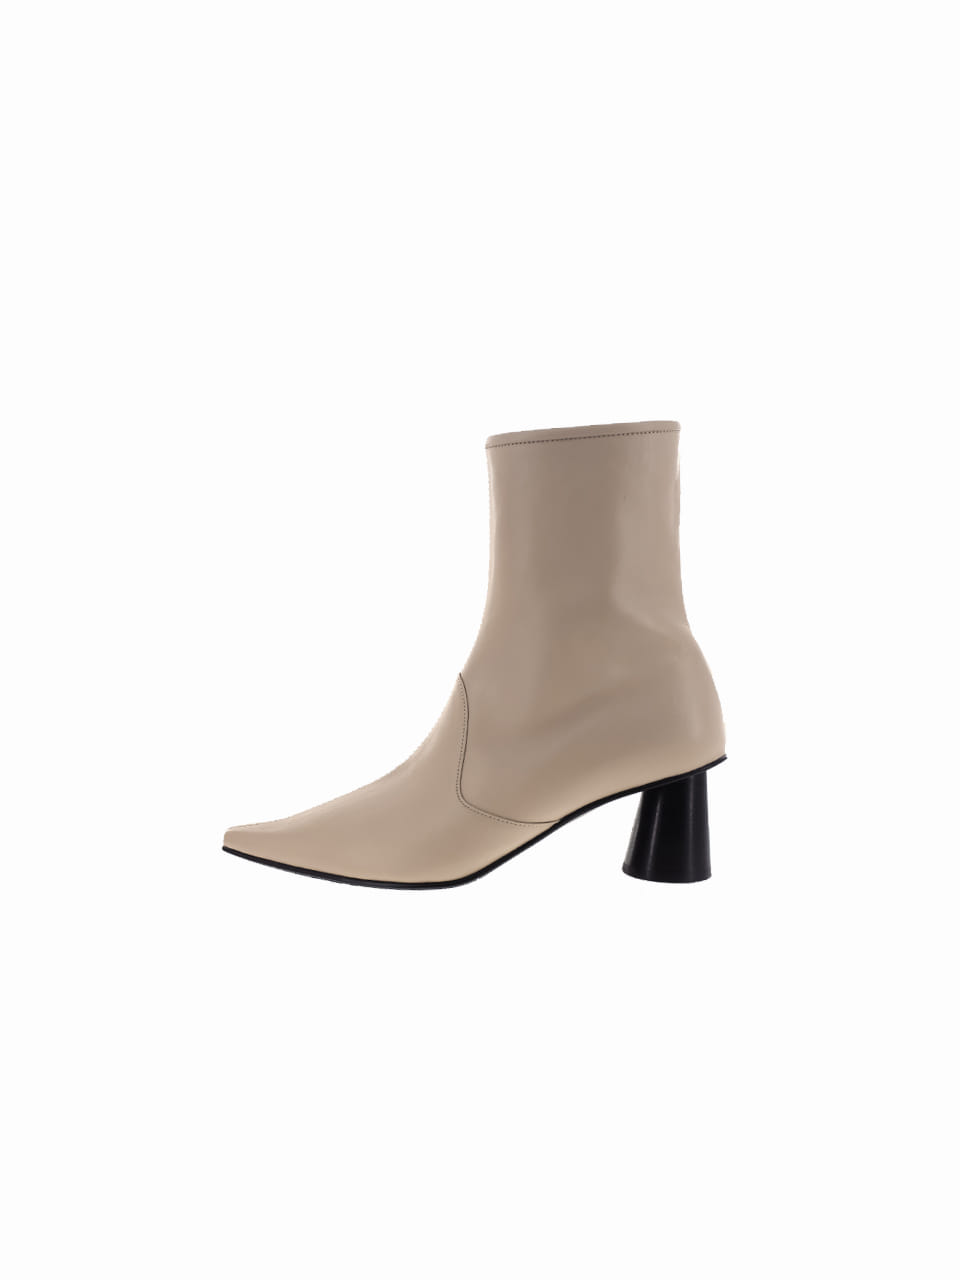 VC middle boots_beige_20515